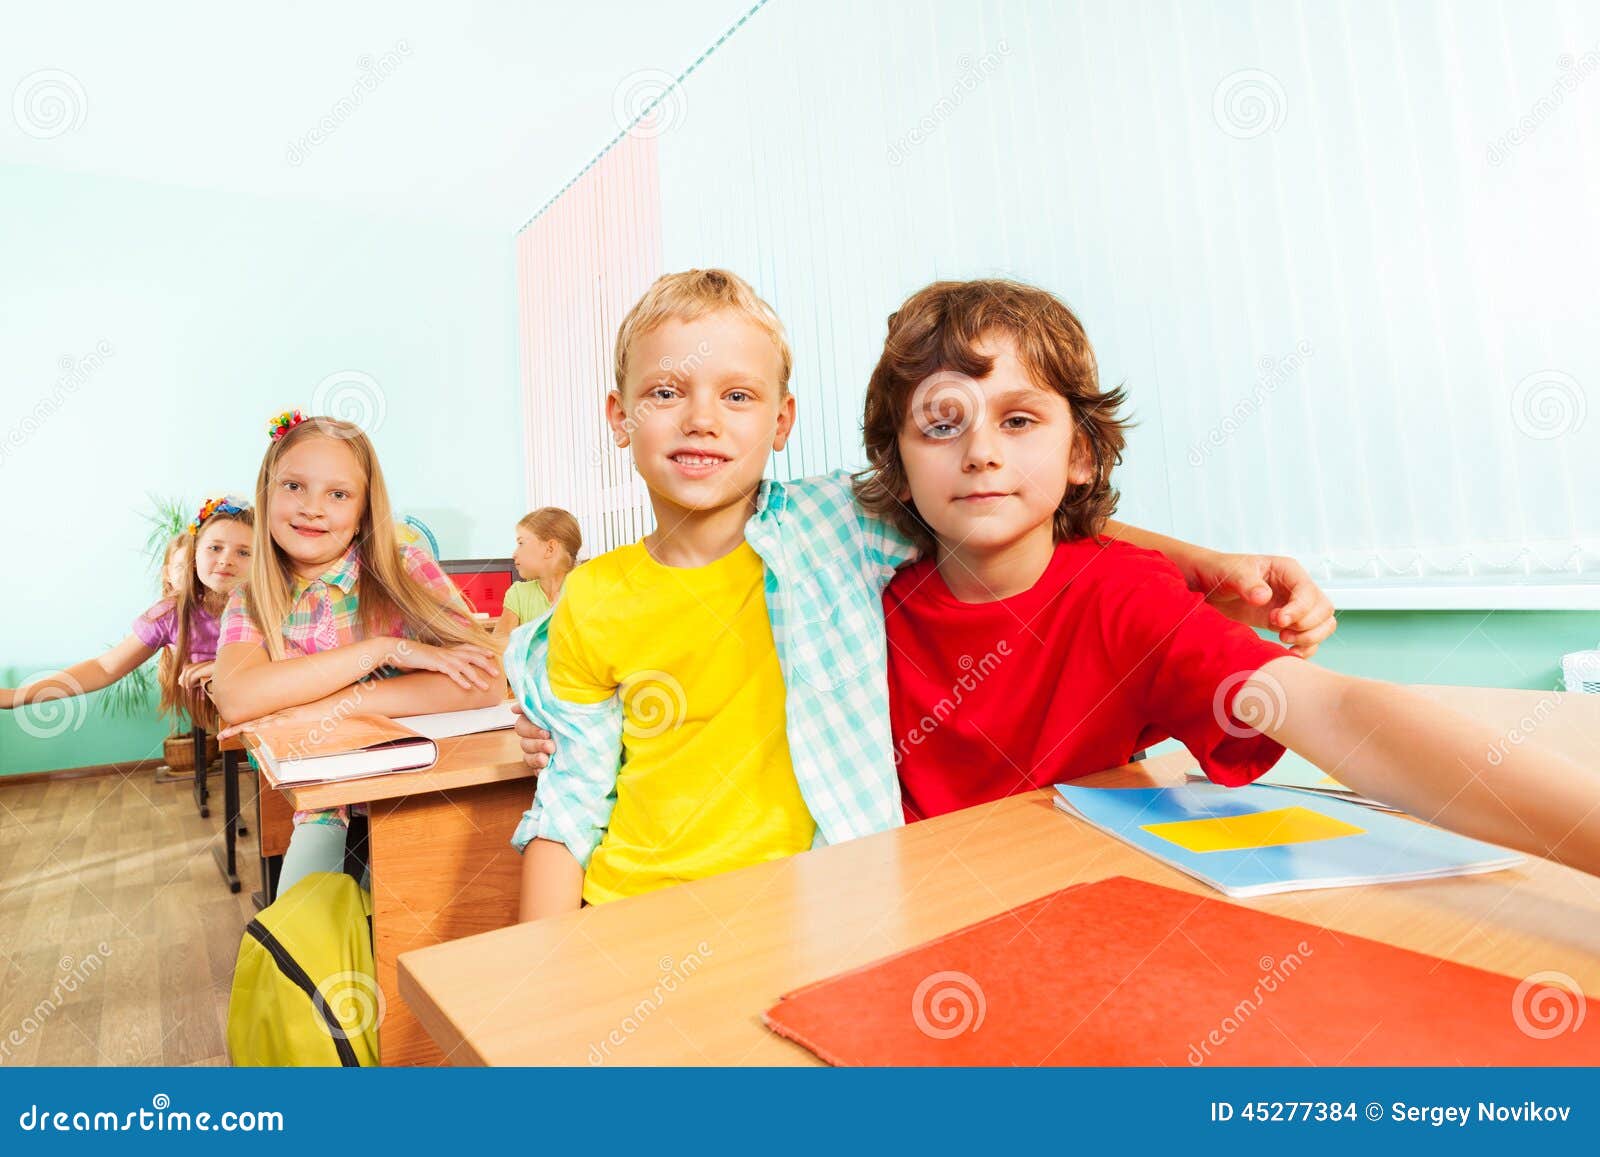 happy boys cuddle and sit together in school